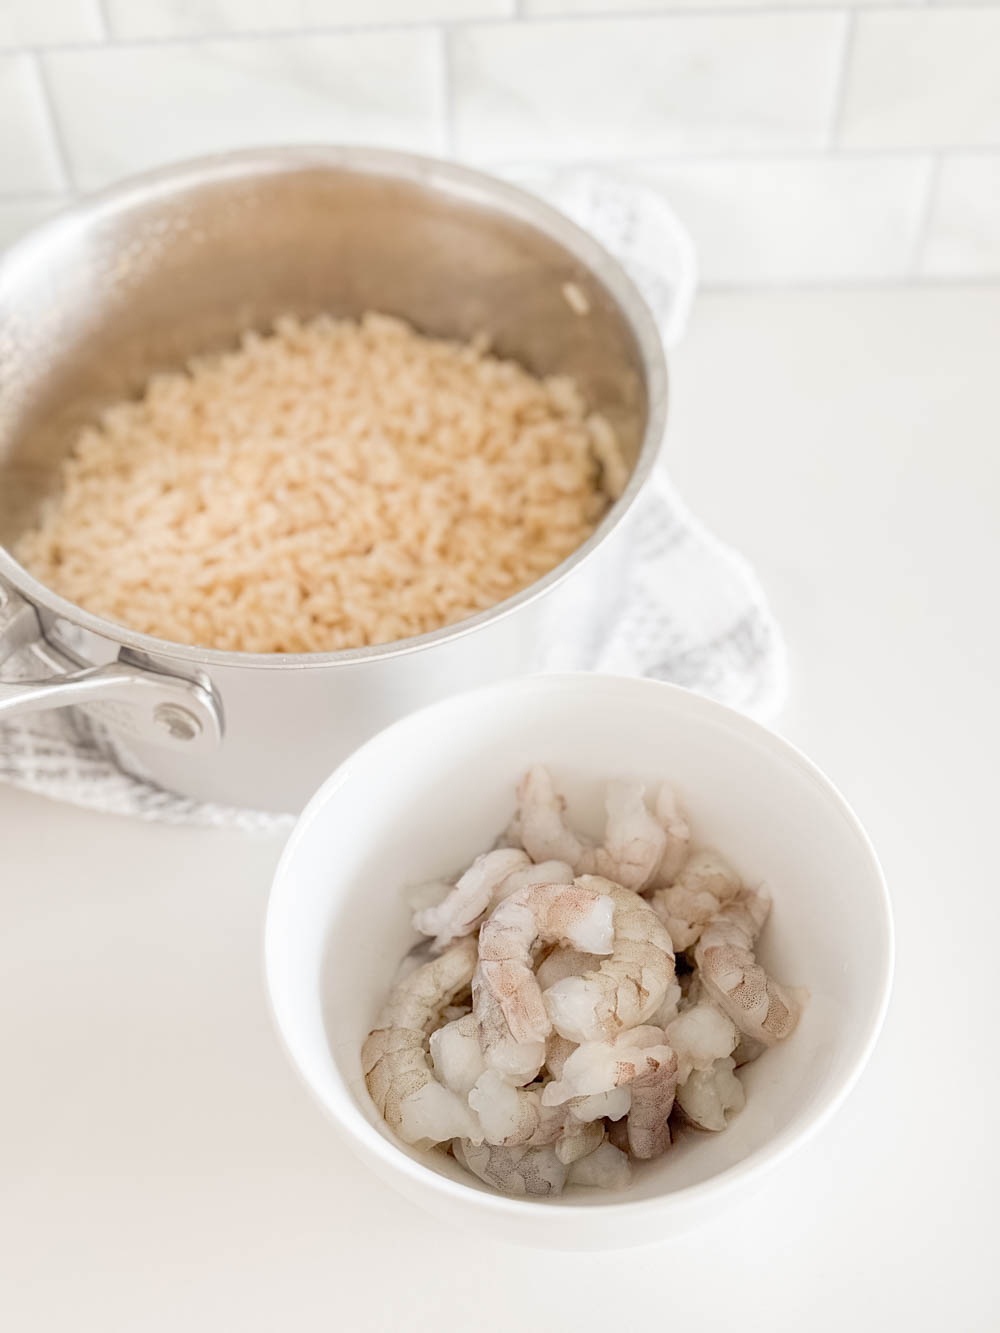 A bowl of raw shrimp and brown rice in a stainless steel pot